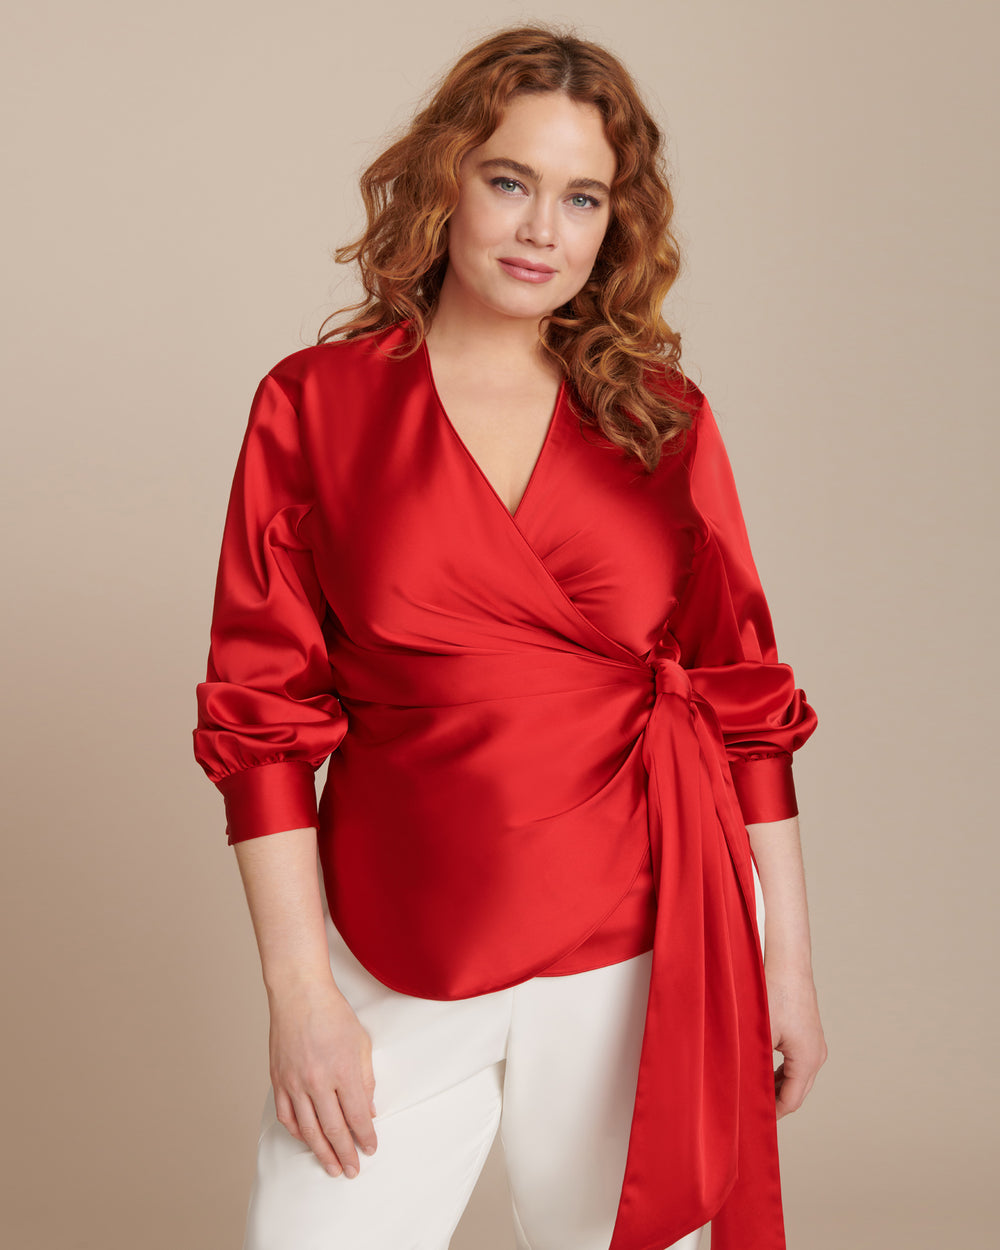 Jonathan Red Exclusive Satin Front Wrap 11 Honoré